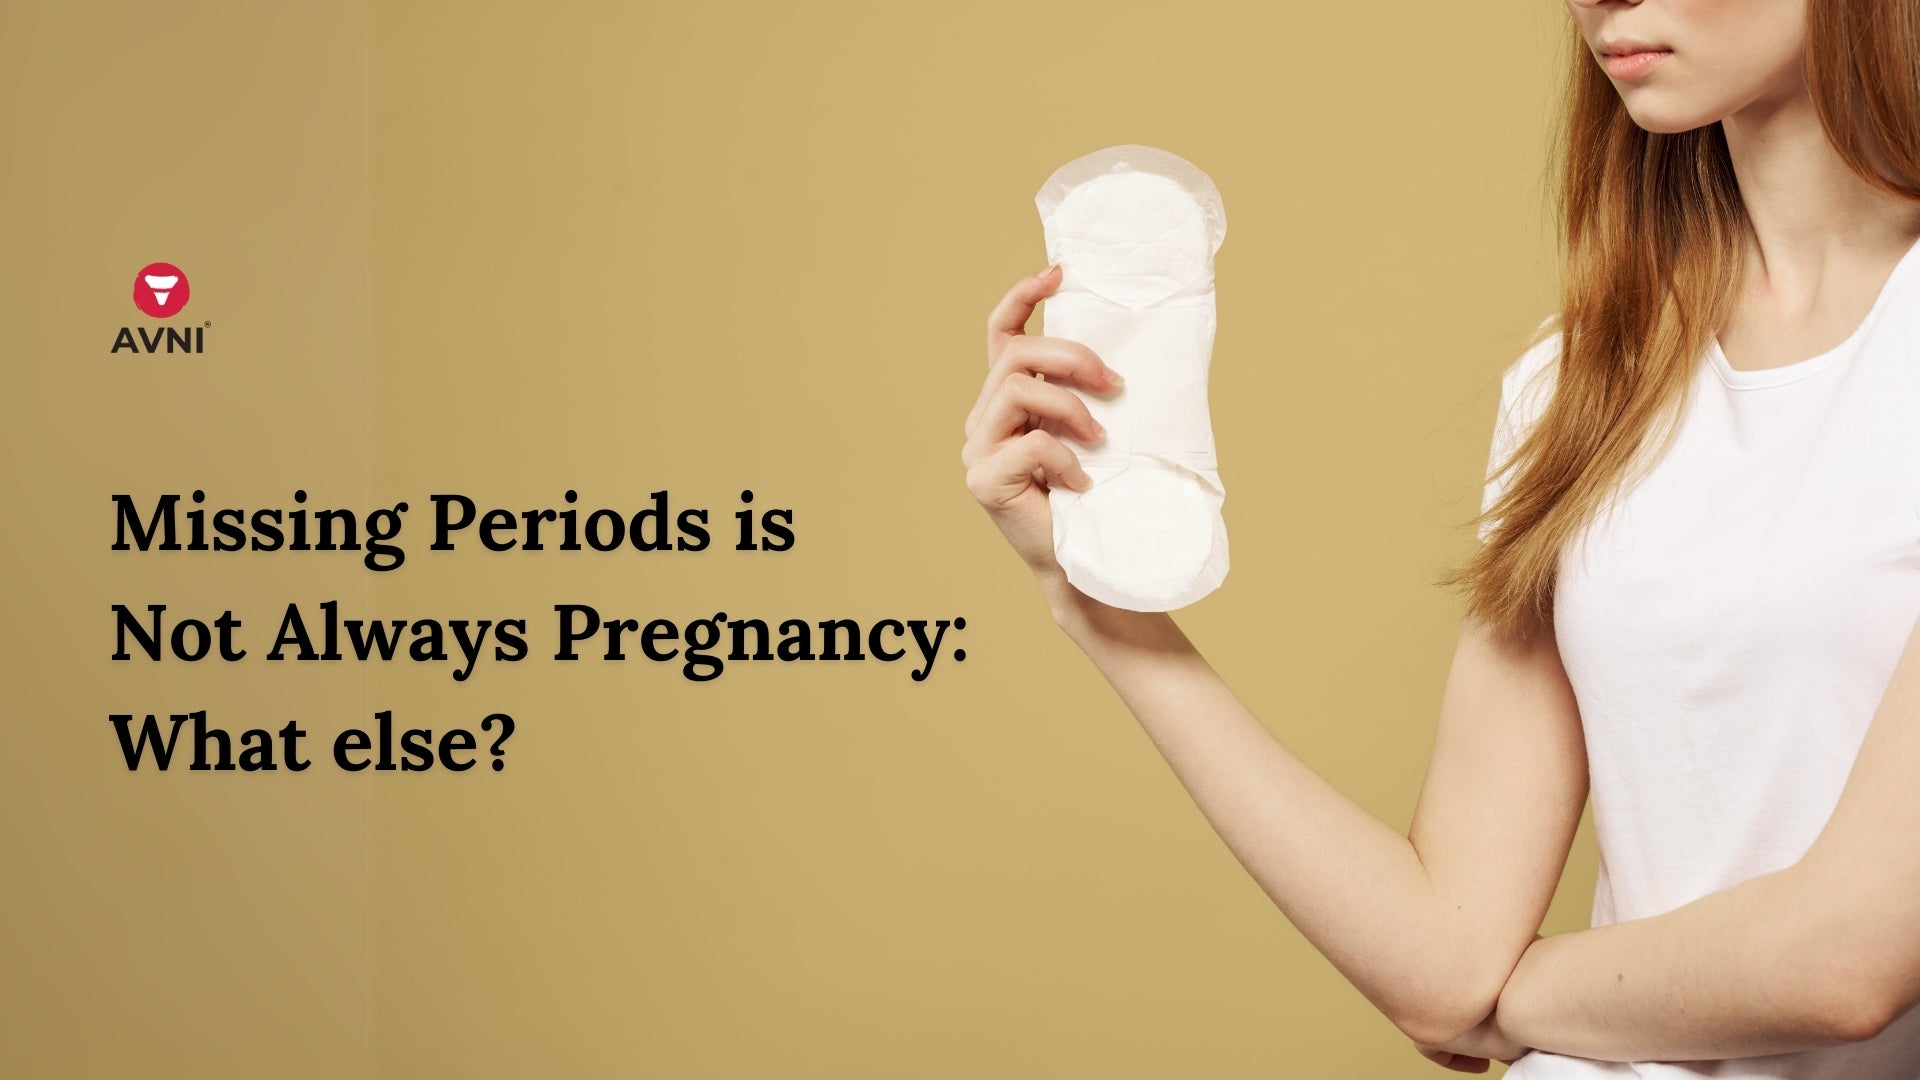 Missing Periods is Not Always Pregnancy: What else?